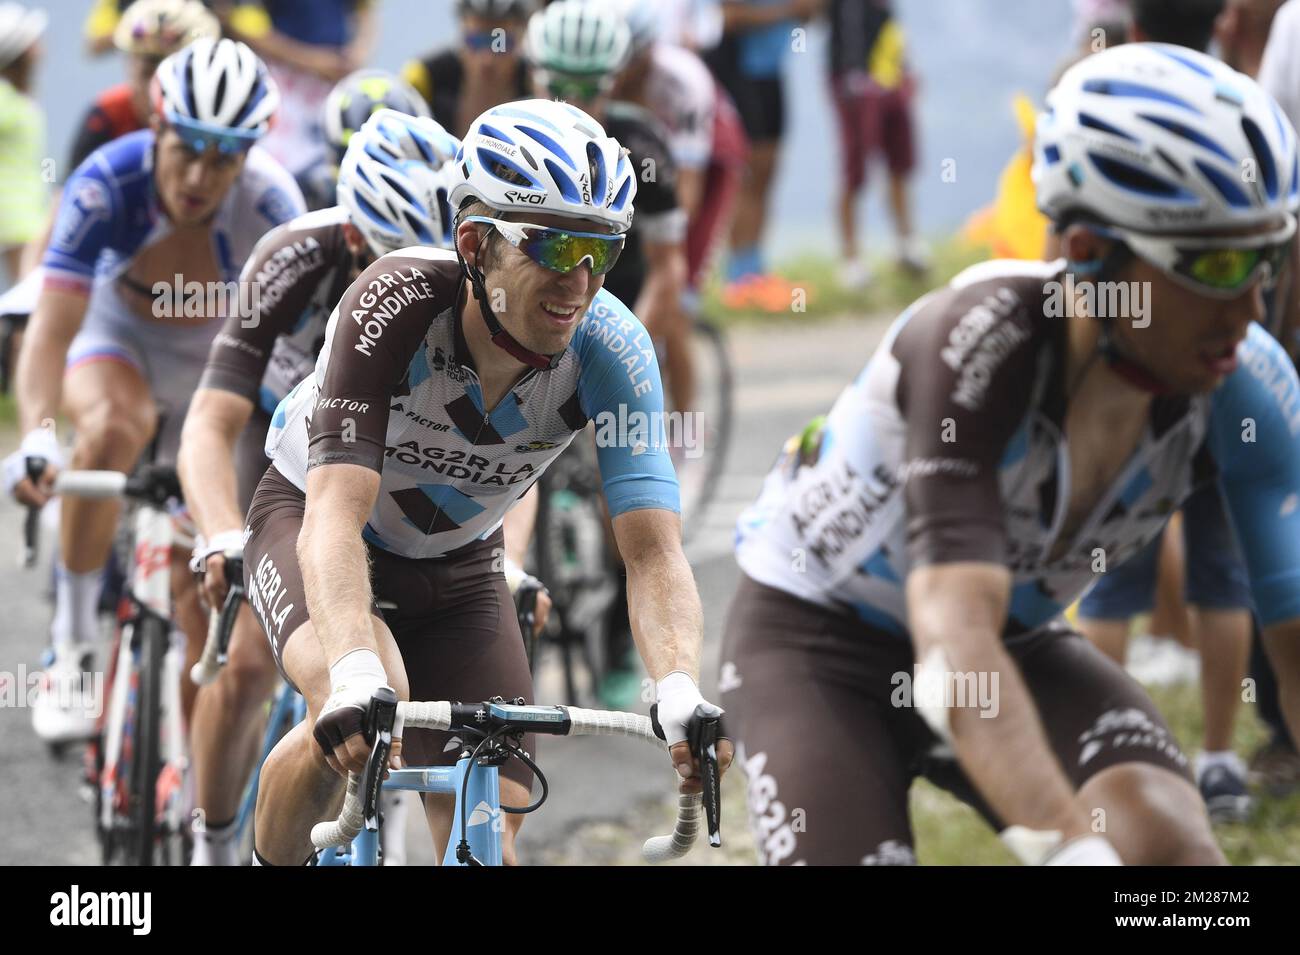 Belgian Jan Bakelants of AG2R La Mondiale pictured in action during the eighth stage of the 104th edition of the Tour de France cycling race, 187,5km from Dole to Station des Rousses, France, Saturday 08 July 2017. This year's Tour de France takes place from July first to July 23rd. BELGA PHOTO YORICK JANSENS  Stock Photo